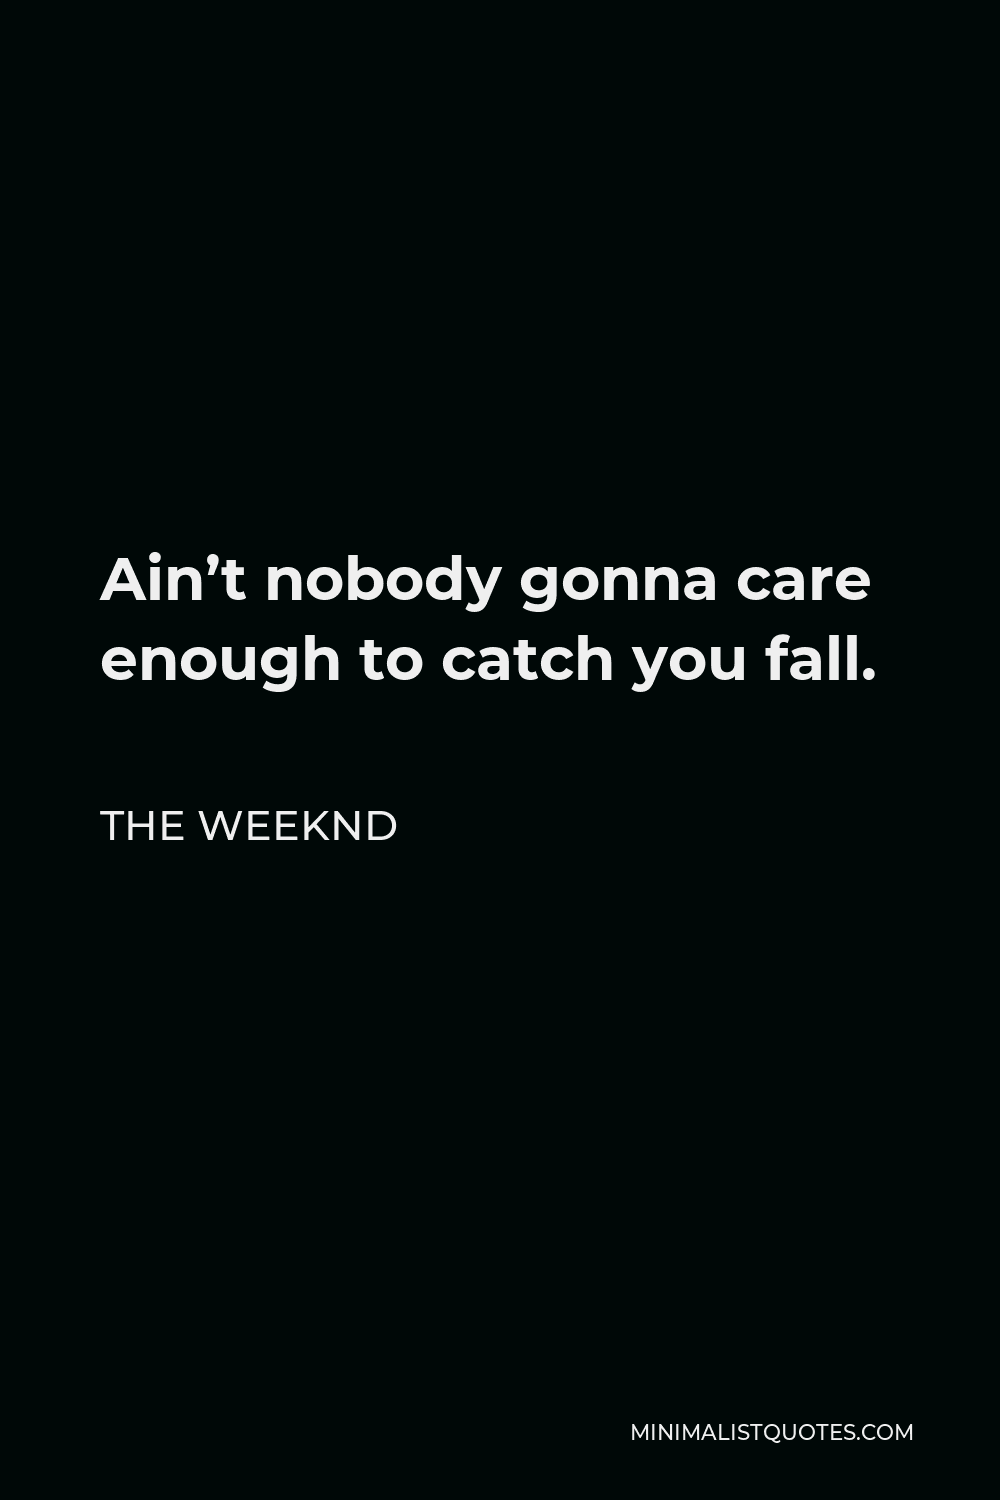 The Weeknd Quote - Ain’t nobody gonna care enough to catch you fall.